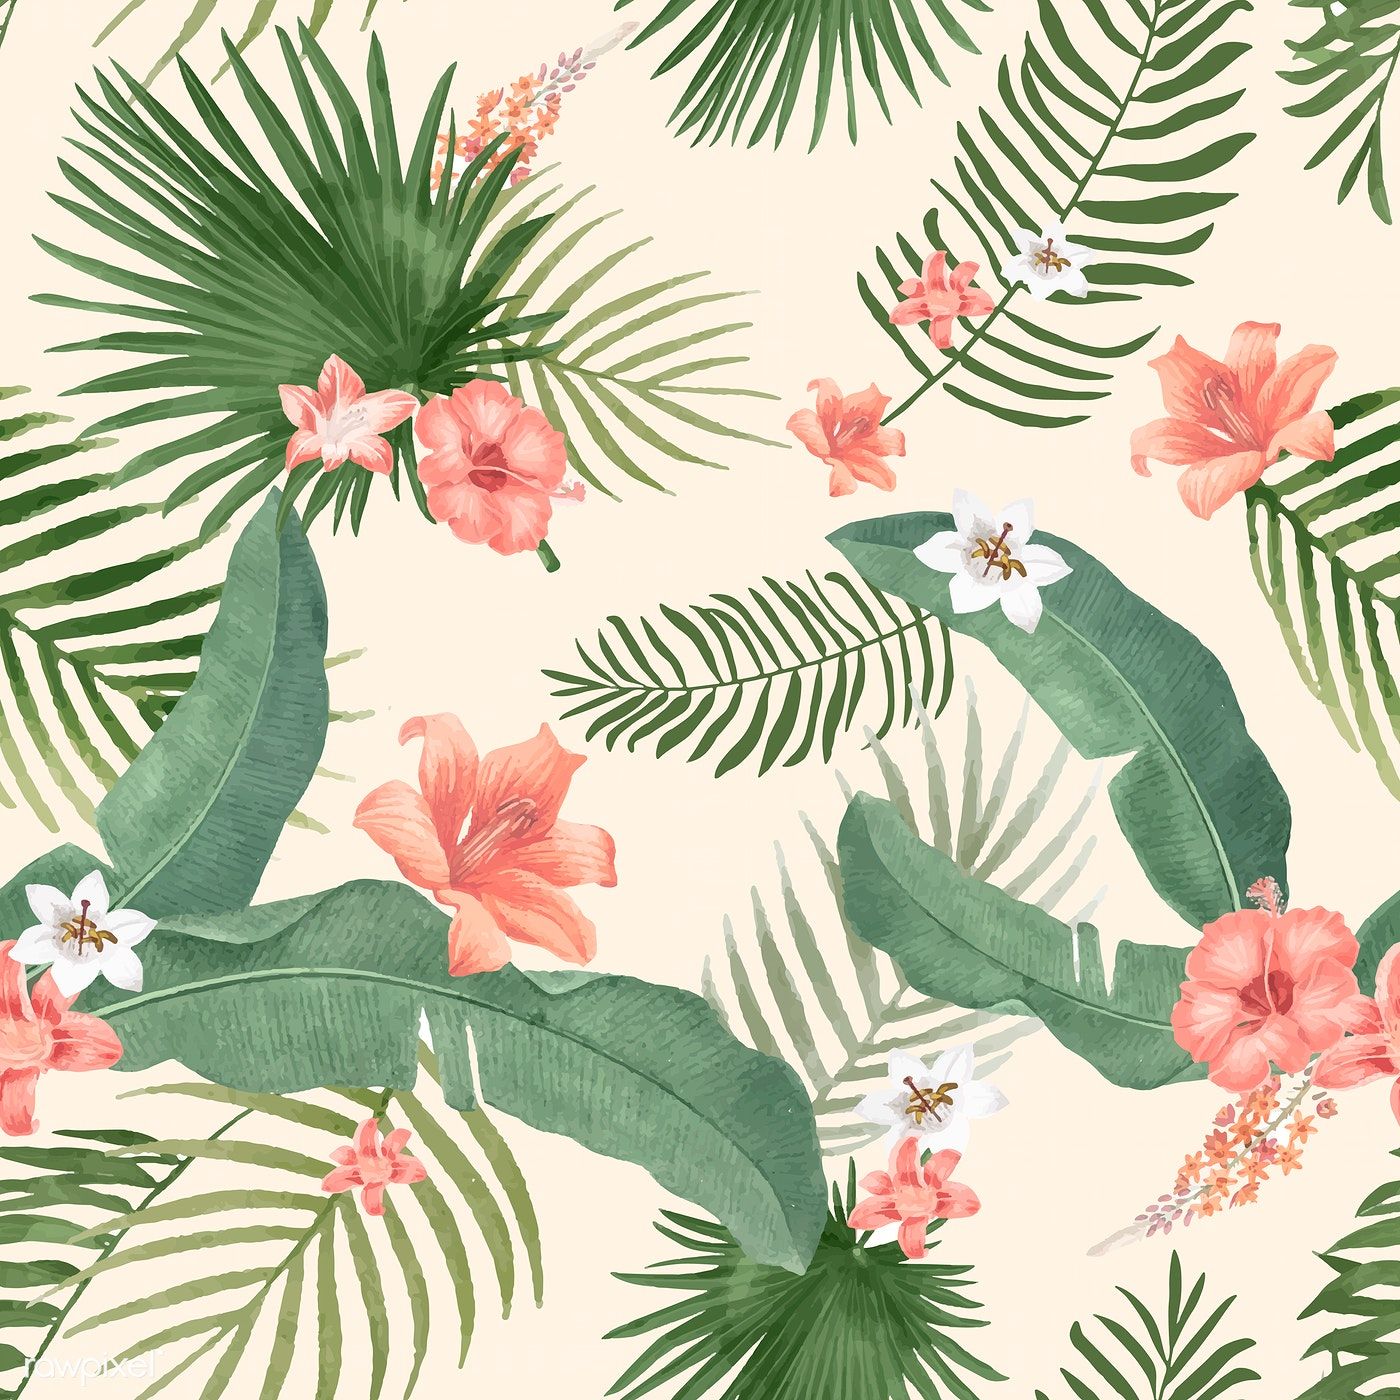 Premium Vector Of Tropical Background With Palm Leaves